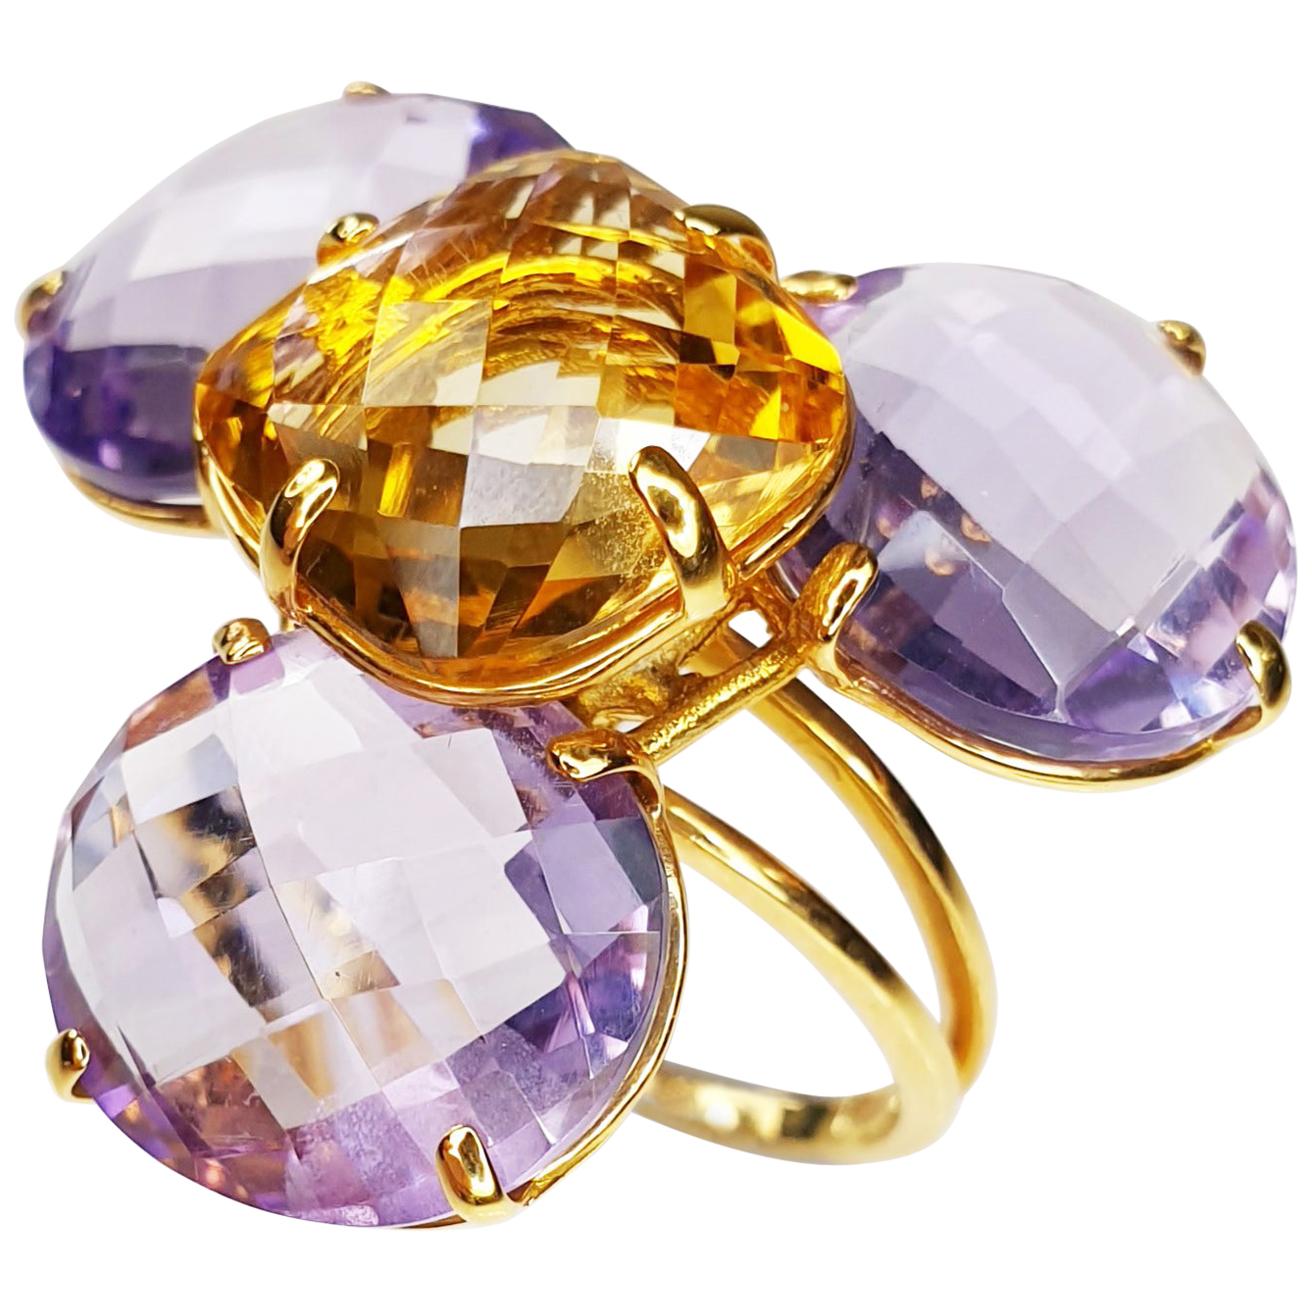 Multiphaceted Flower Ring with Central Citrine and Three Amethysts For Sale